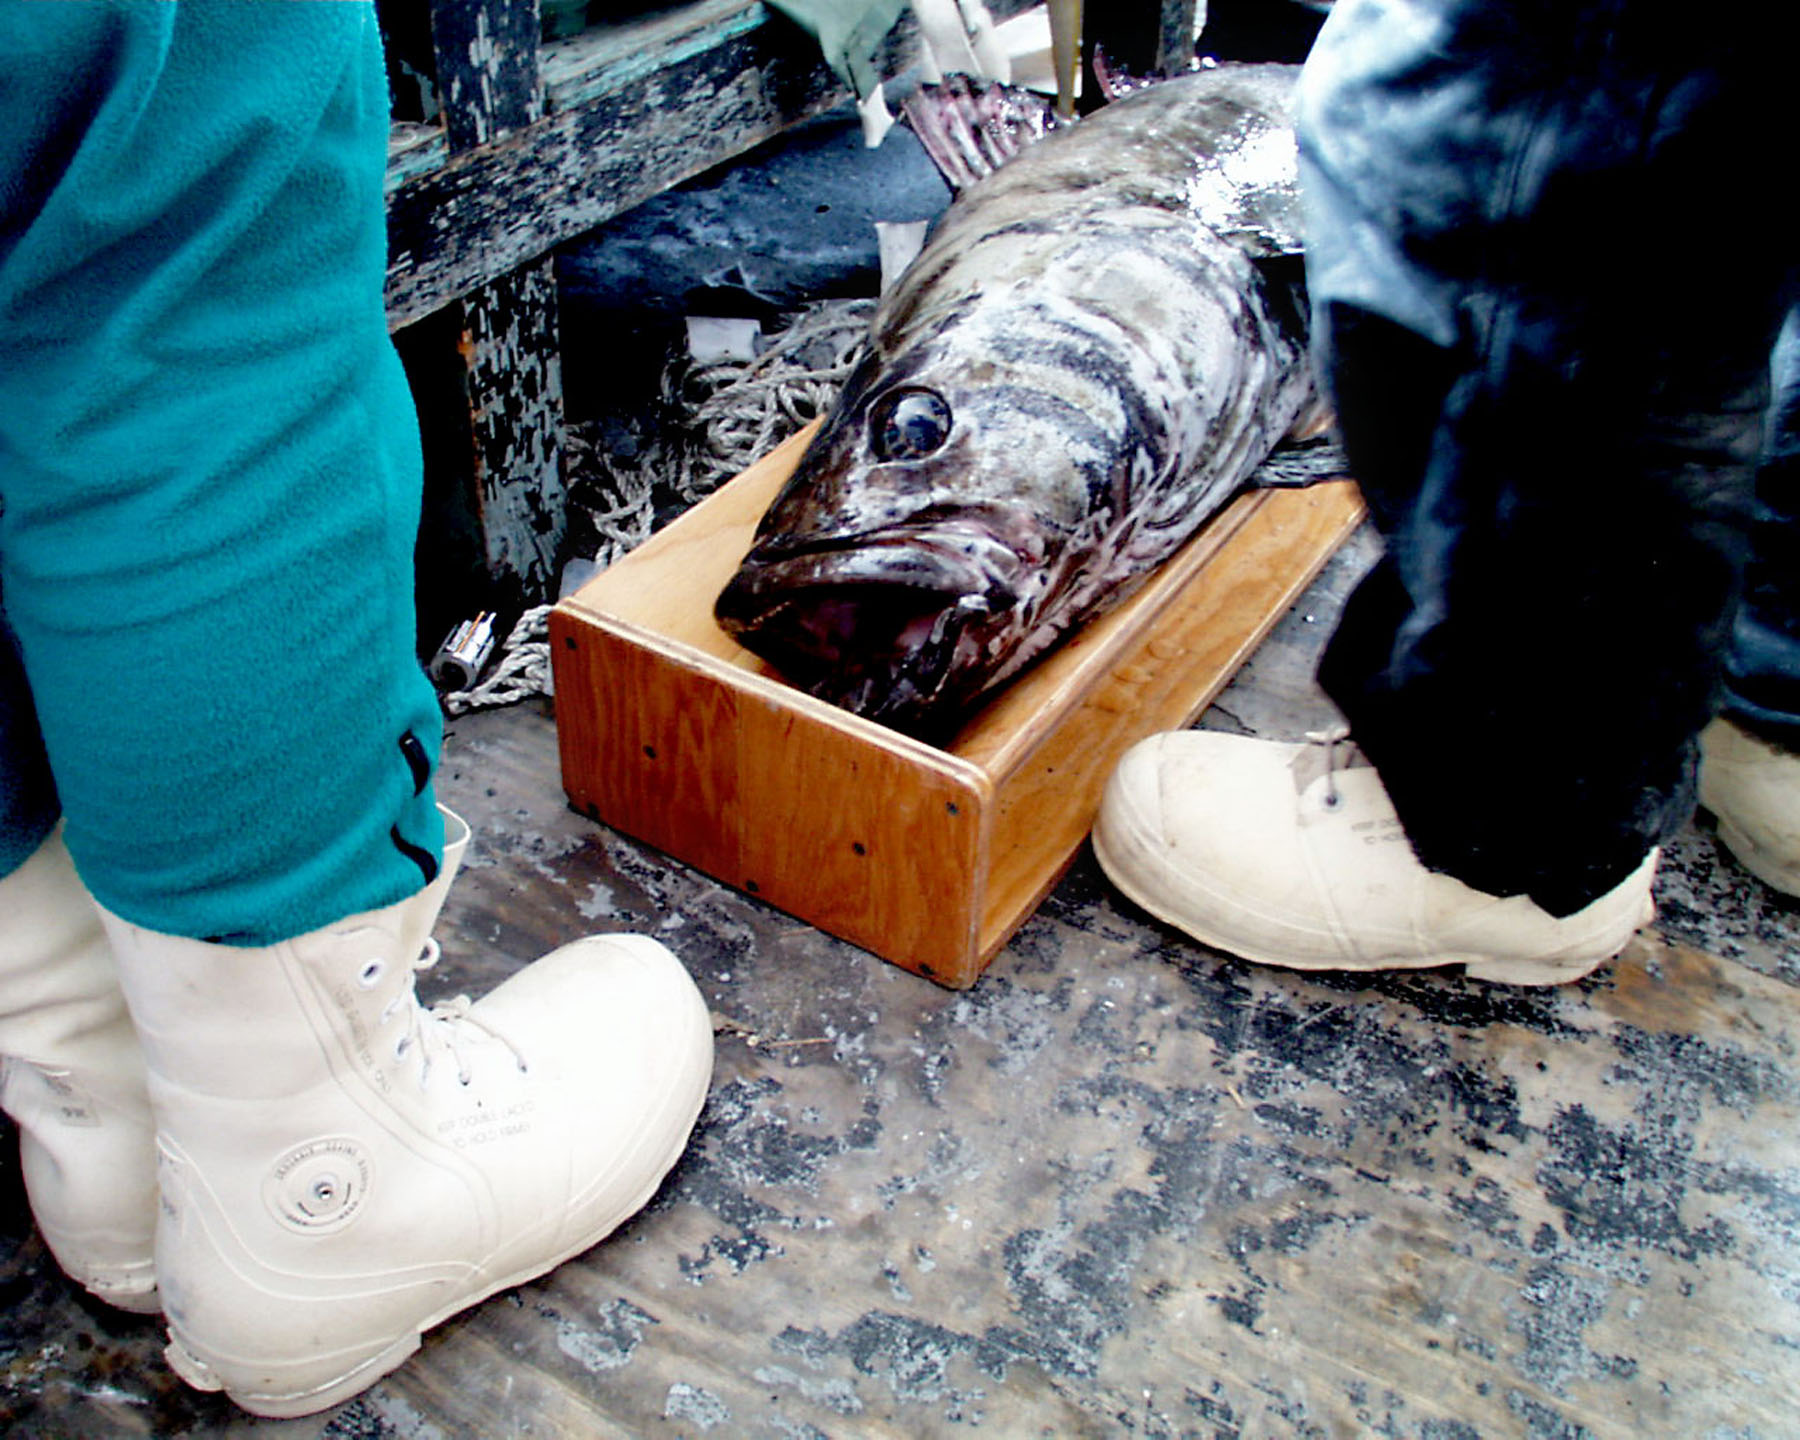 A large fish in a wooden box near the feet of two people.